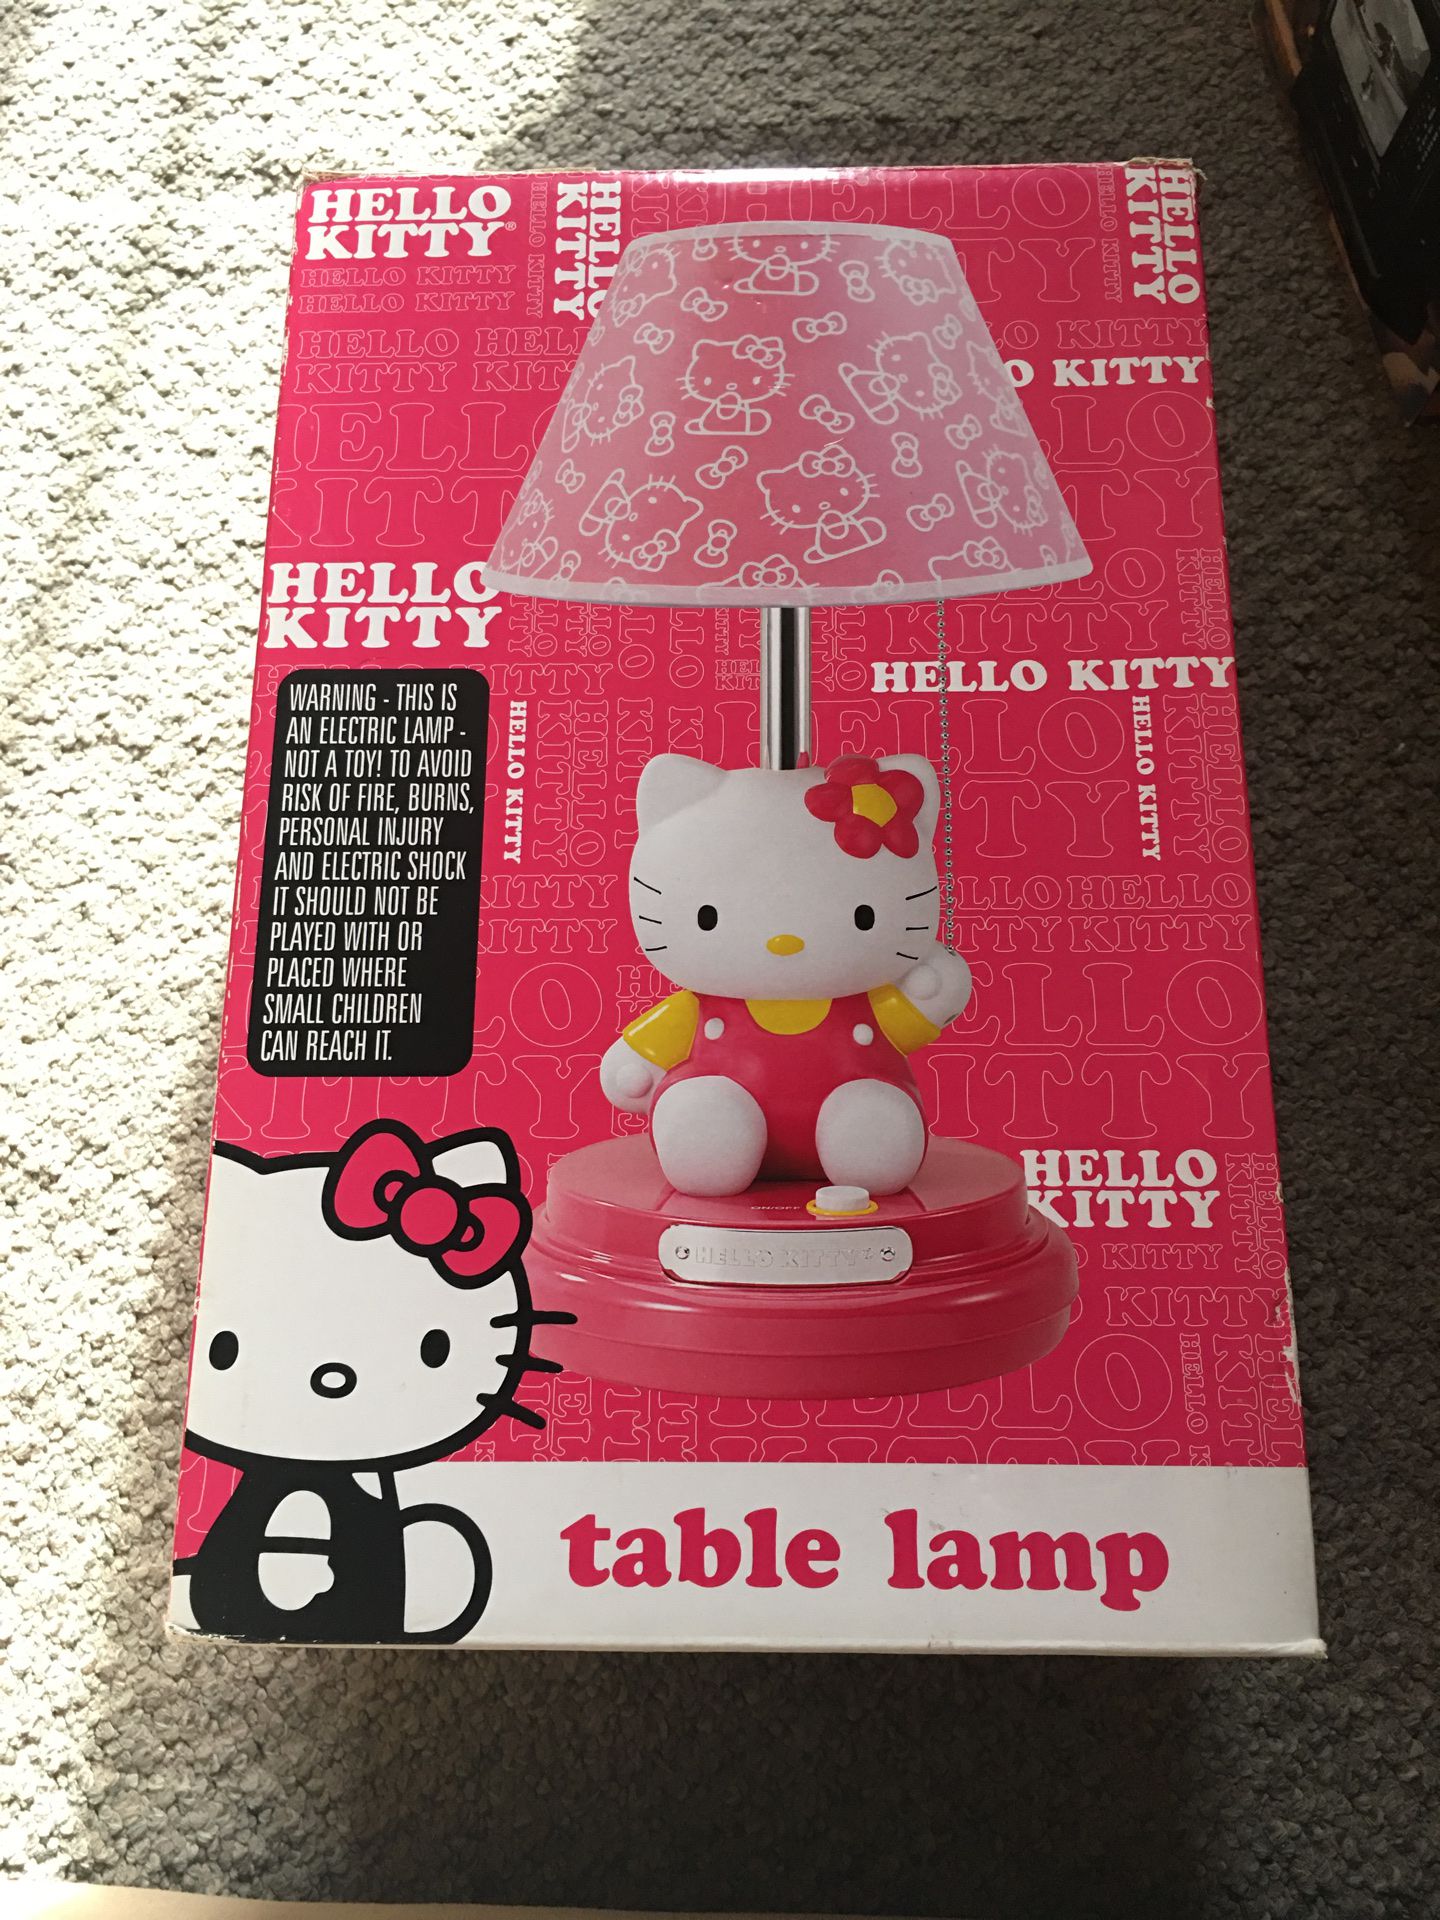 HELLO KITTY LAMP: MAKE AN OFFER: IT DOES HAVE A CRACKED SHADE